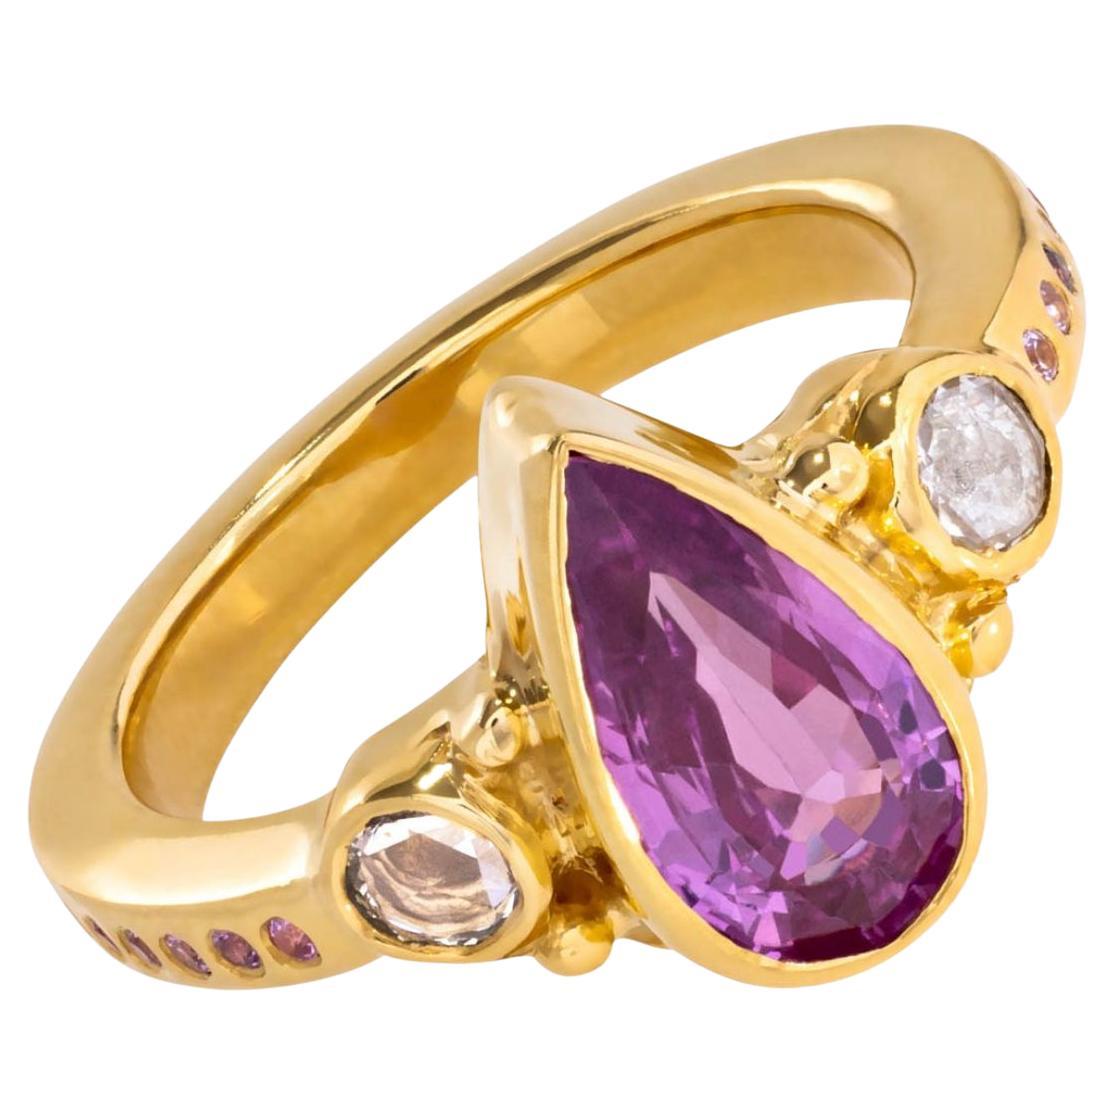 Paris & Lilly 22K Gold, Pear Shaped, Pink Sapphire and Diamond Ring For Sale